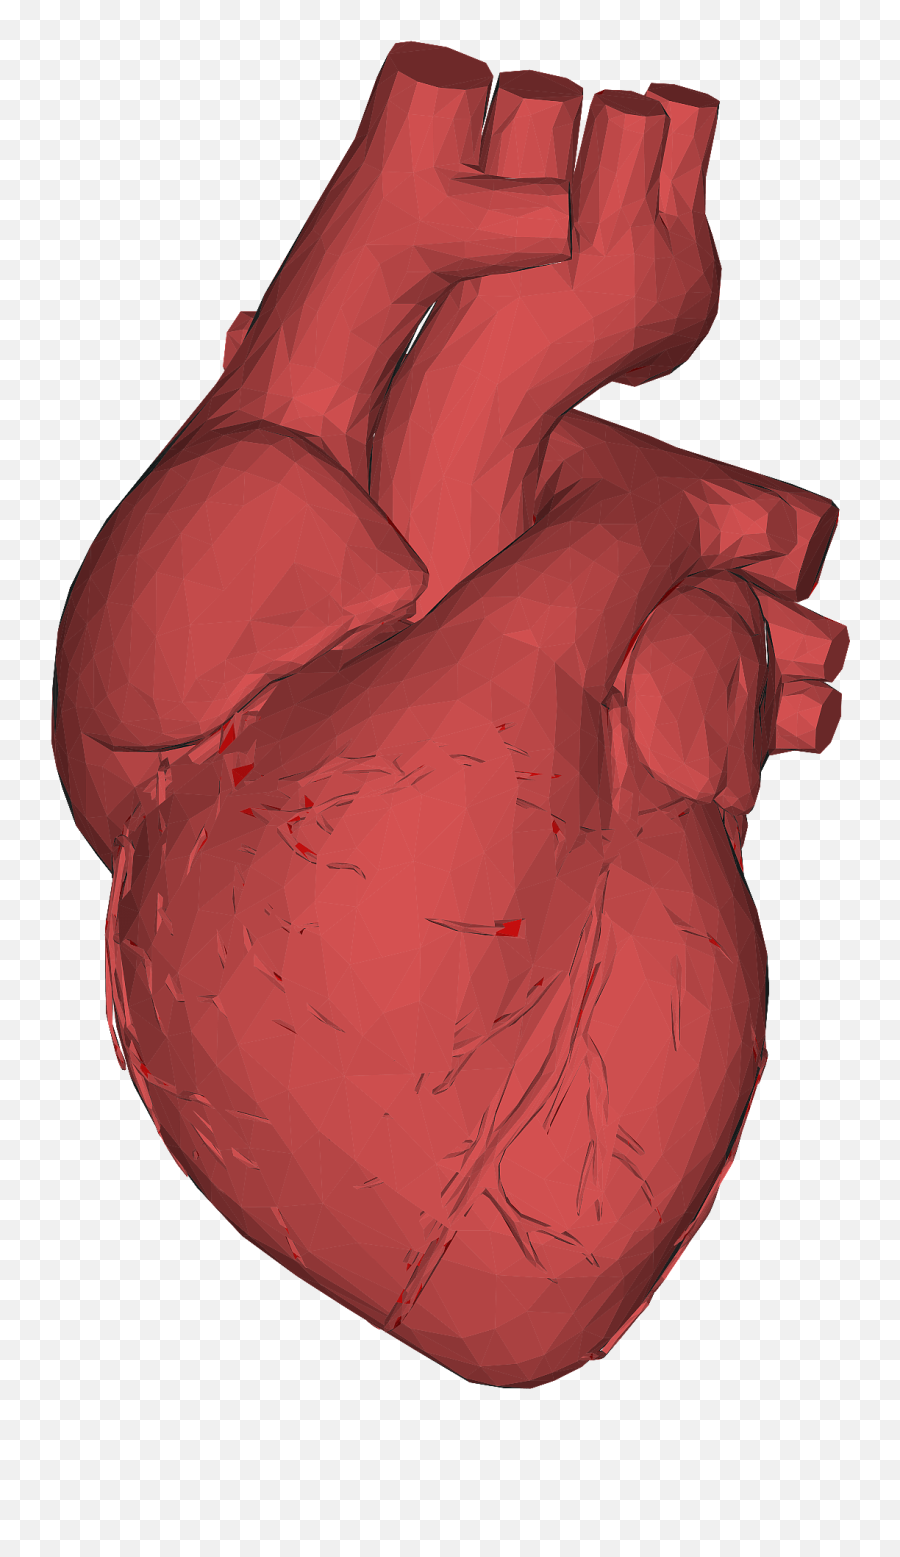 The Heart Of The Matter - Heart Anatomical Transparent Background Emoji,Valentines Day Emojis